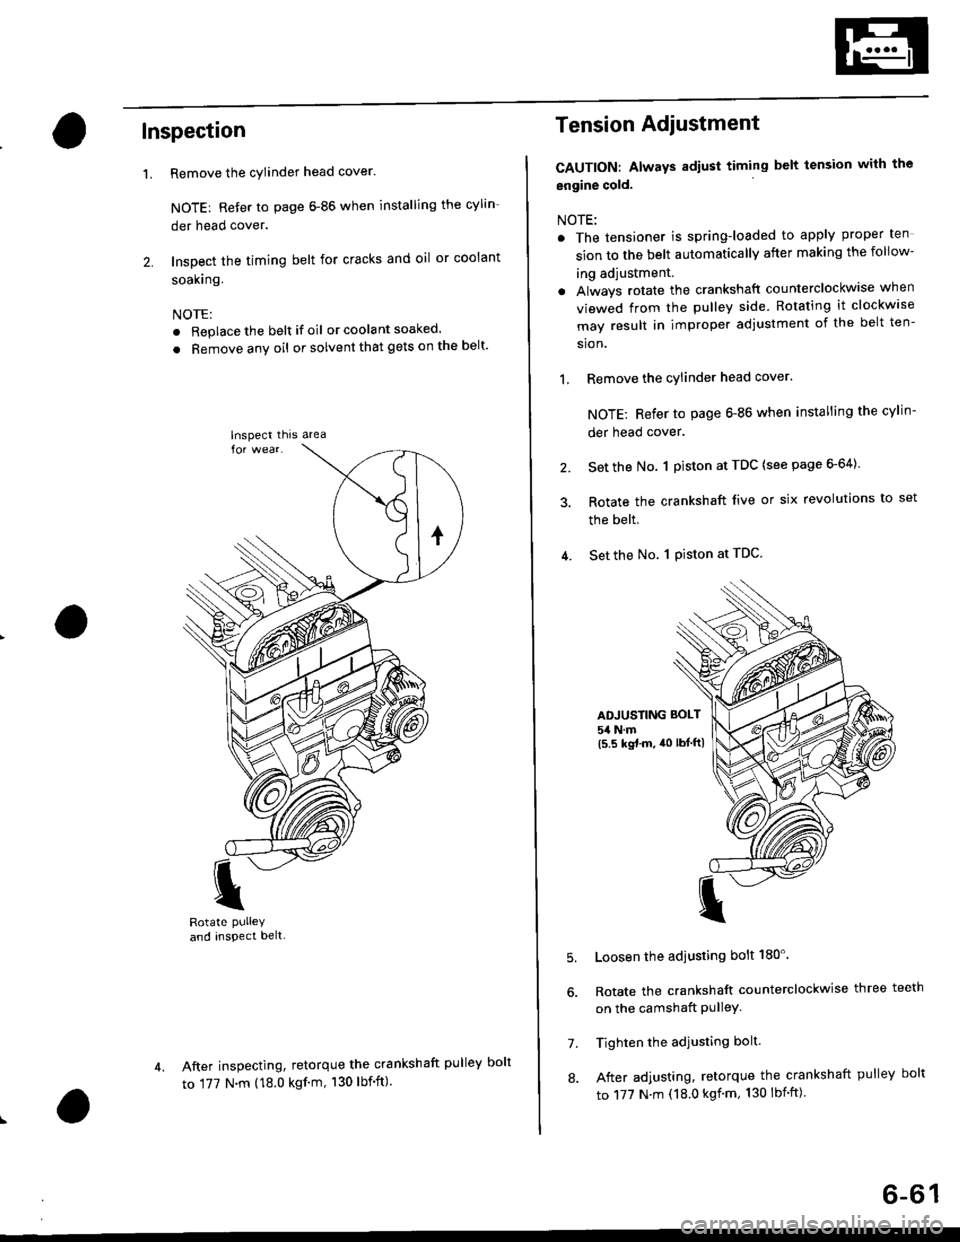 HONDA CIVIC 1997 6.G Workshop Manual Inspection
Remove the cylinder head cover.
NOTE: Refer to page 6-86 when installing the cylin-
der head cover.
Inspect the timing belt for cracks and oil or coolant
soakrng.
NOTE:
. Replace the belt i